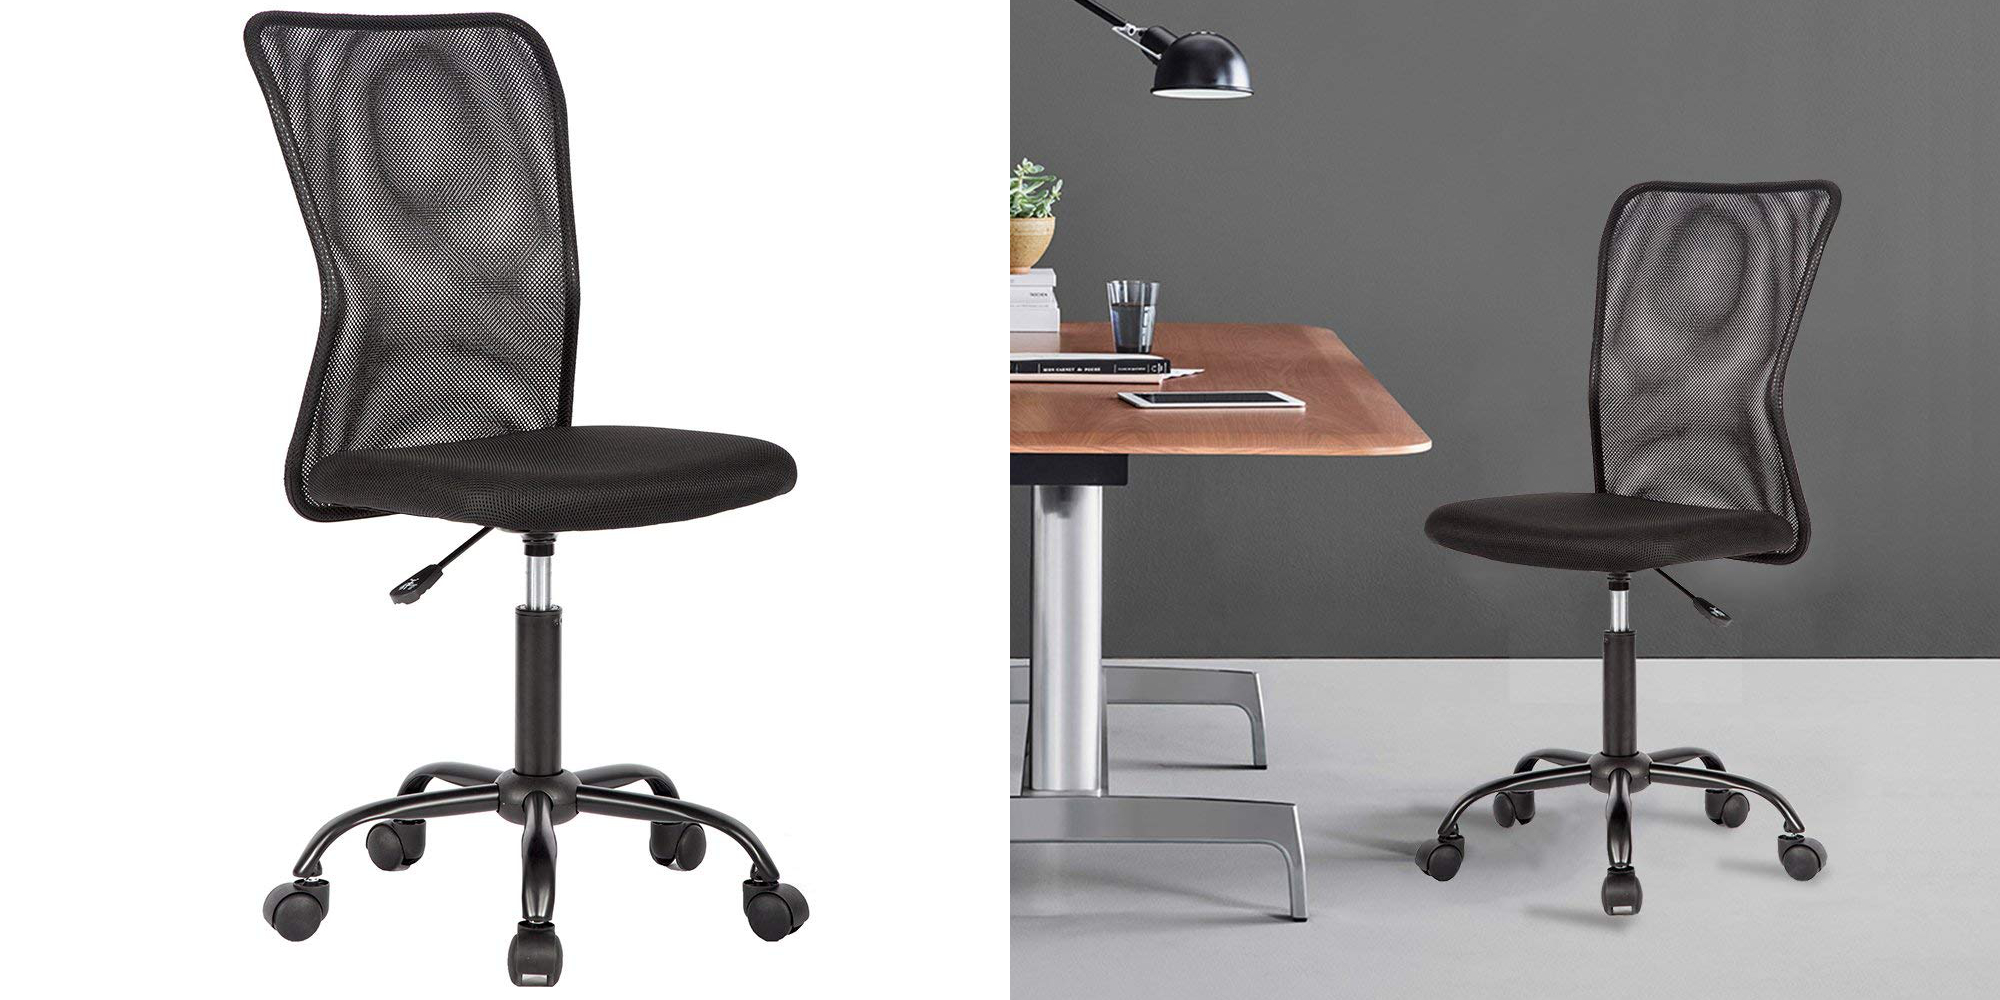 Amazon takes 20% off this highly-rated desk chair, now $28 shipped